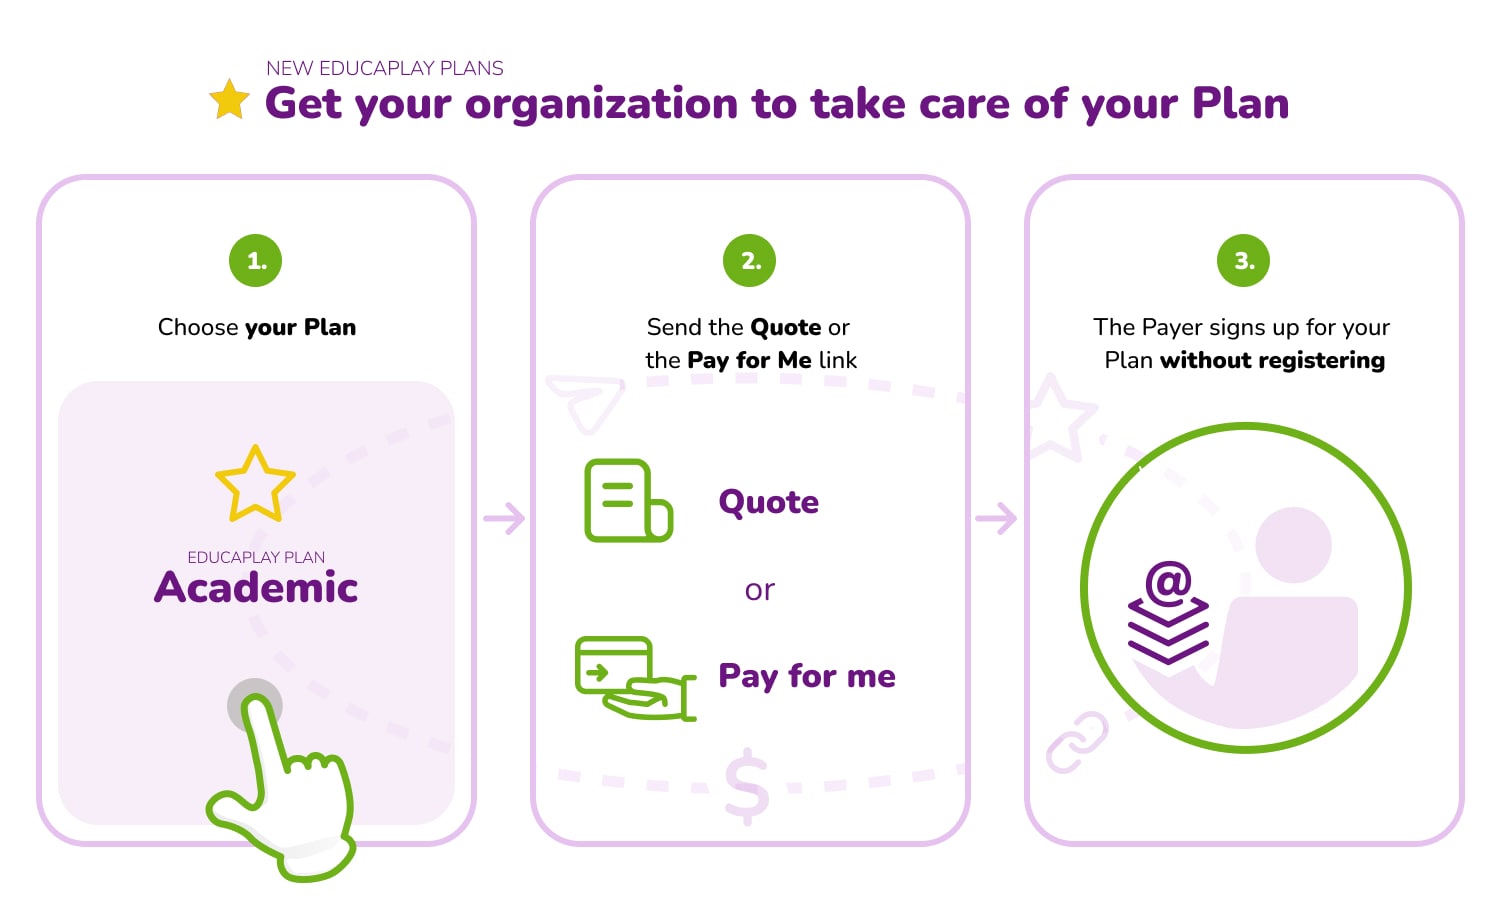 Get your organization to take care of your Plan